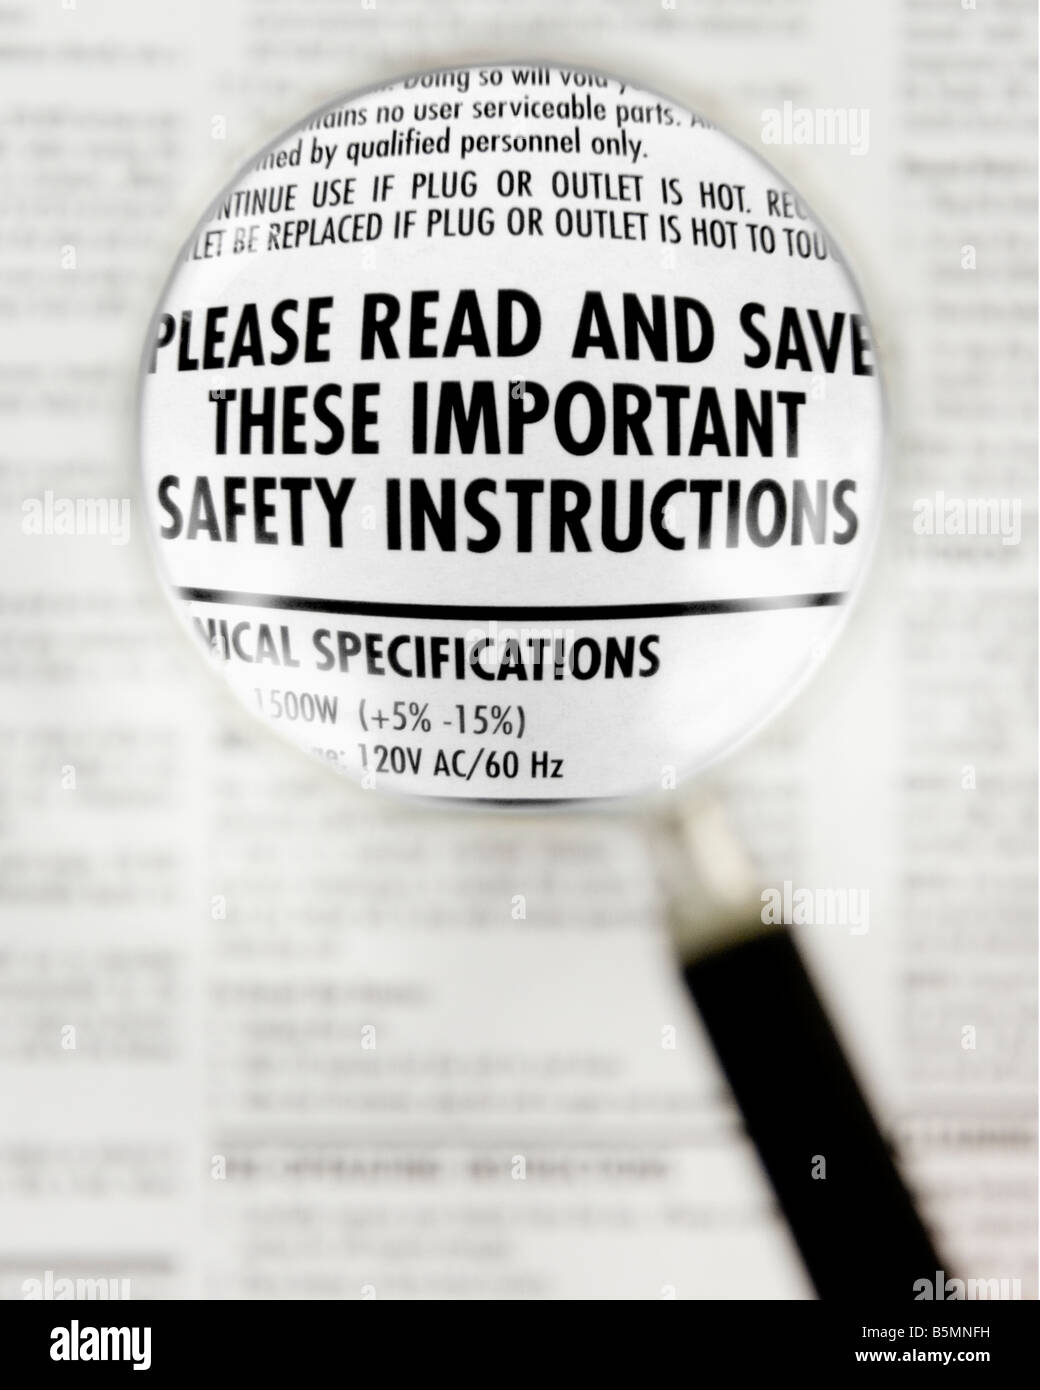 Warning label of a product insert that instructs the reader to read and save the safety instructions. Stock Photo